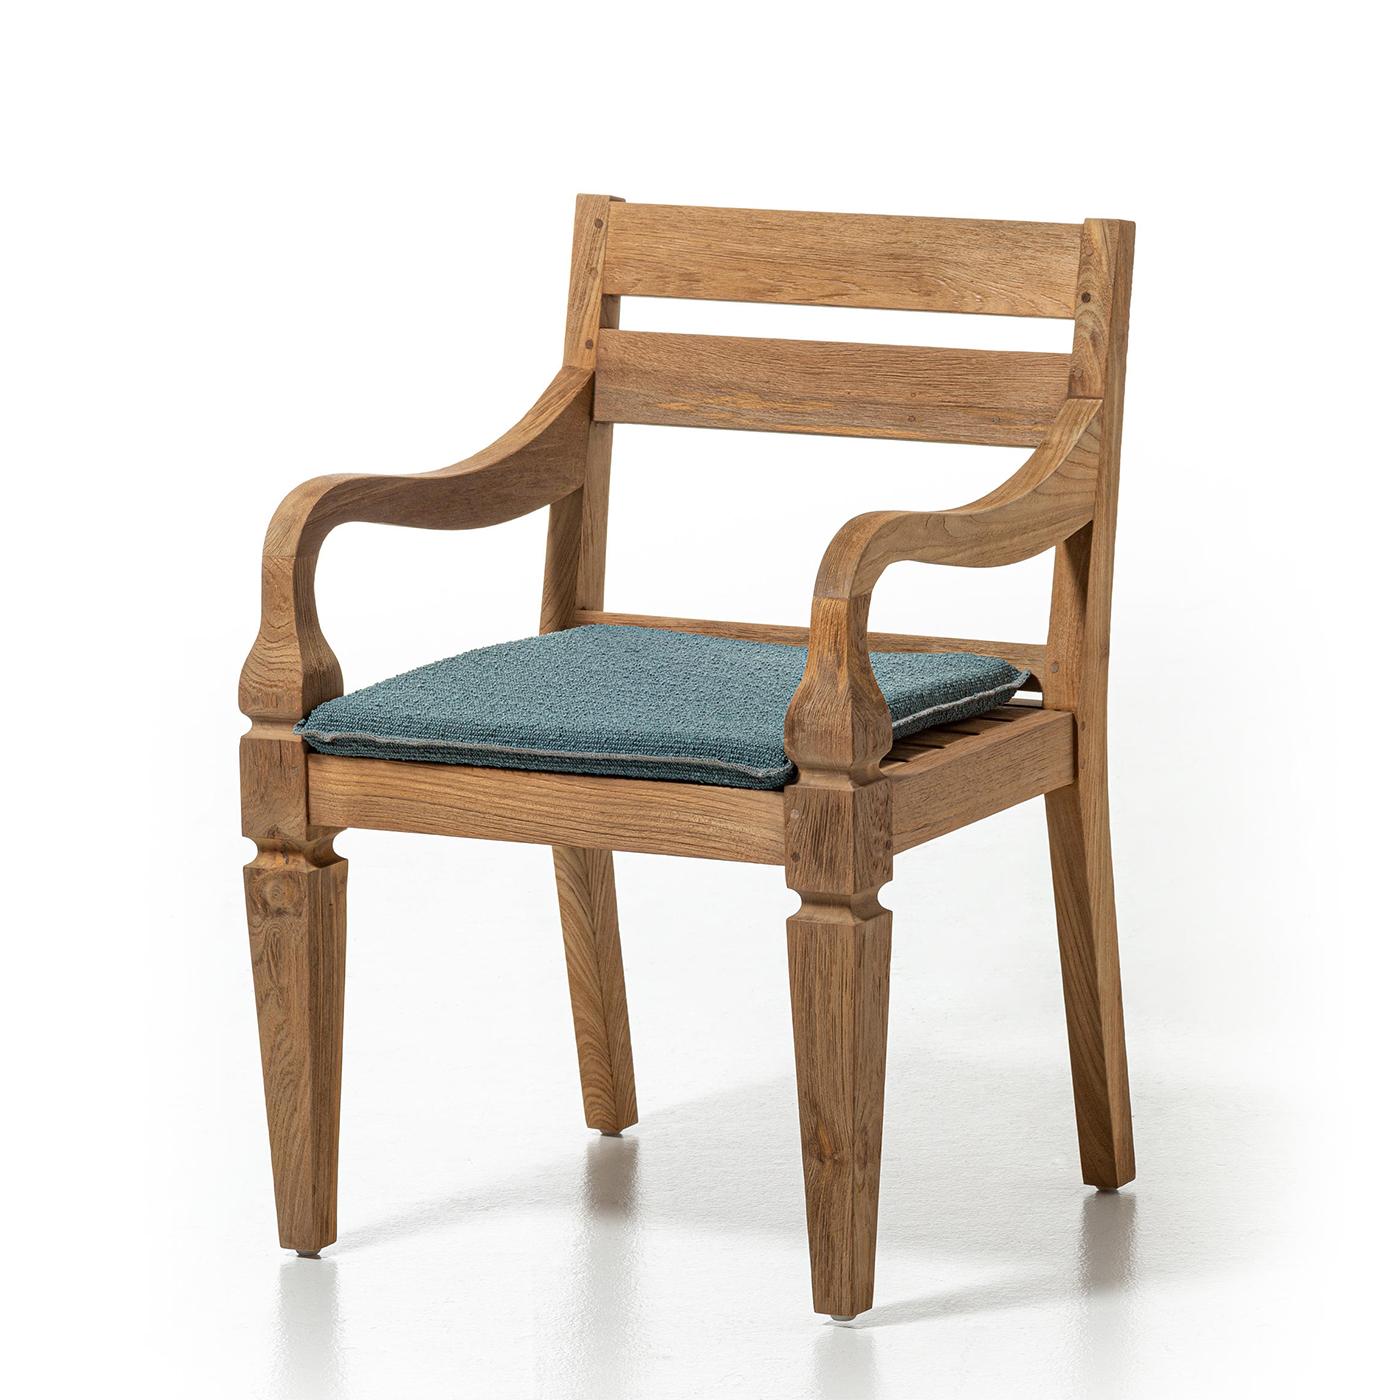 Hand-Crafted Barletta Teak Chair For Sale